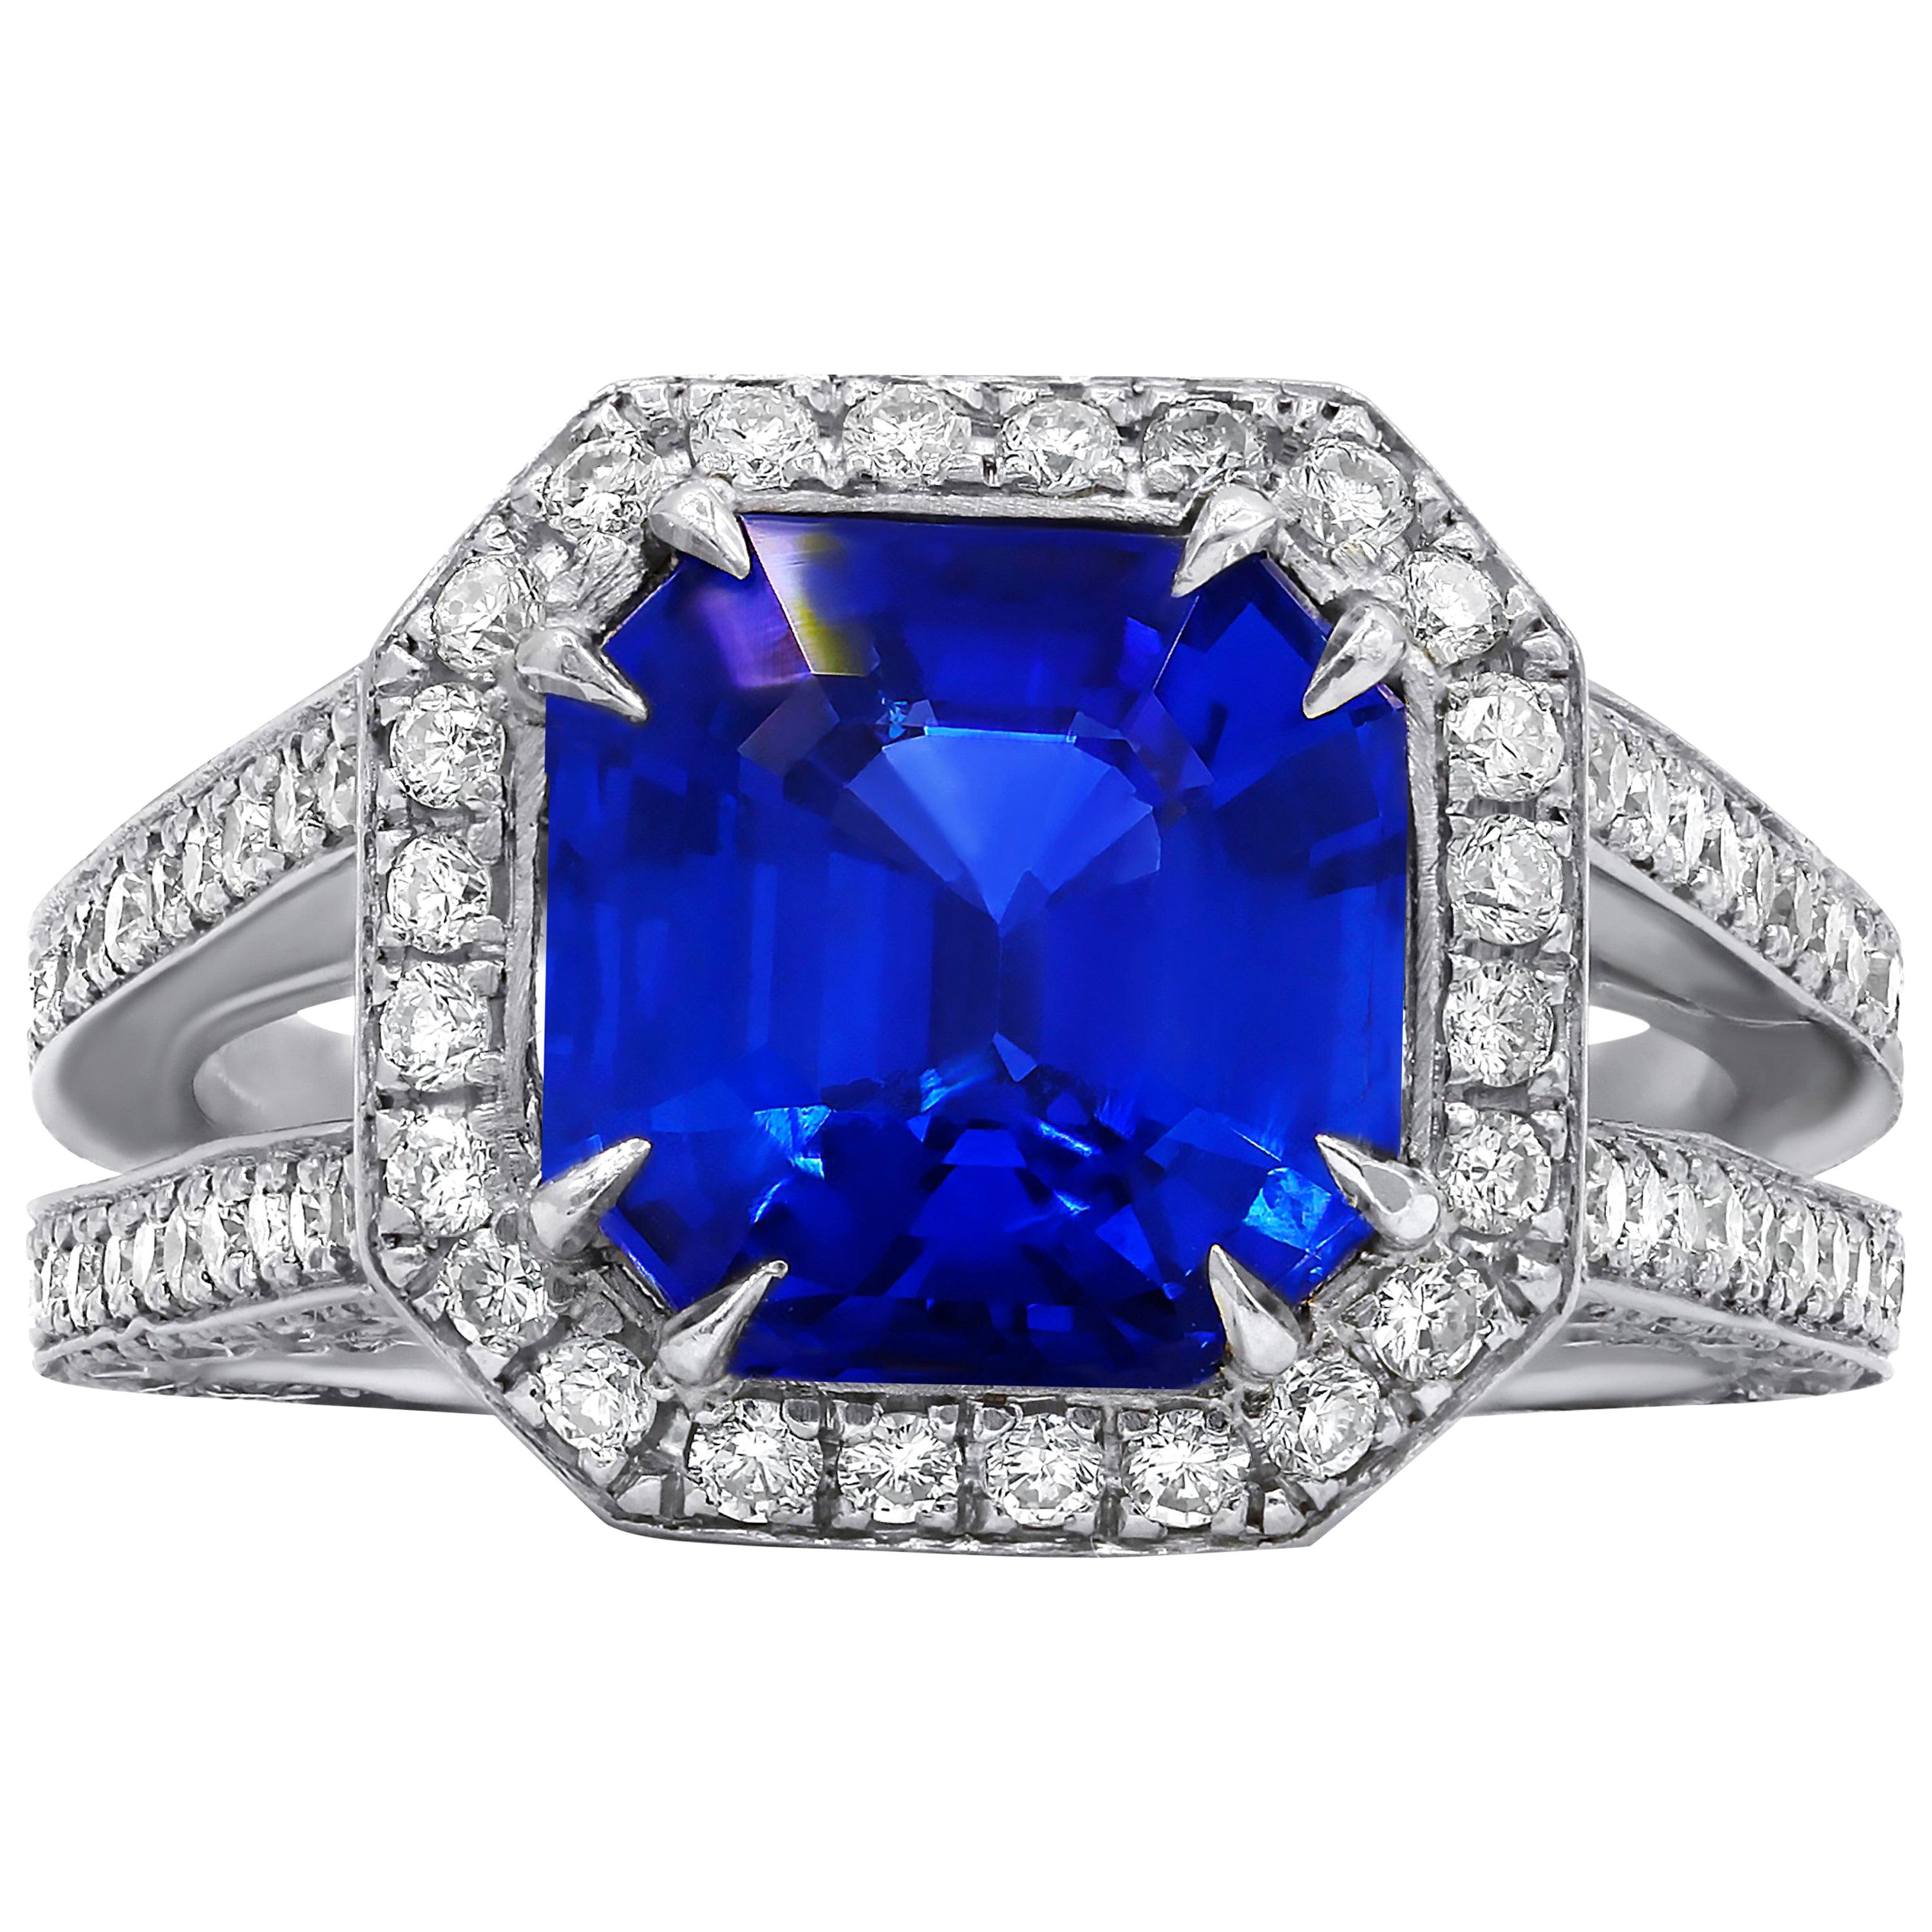 Certified 3.98 Carat Ceylon Sapphire and Diamond Ring For Sale